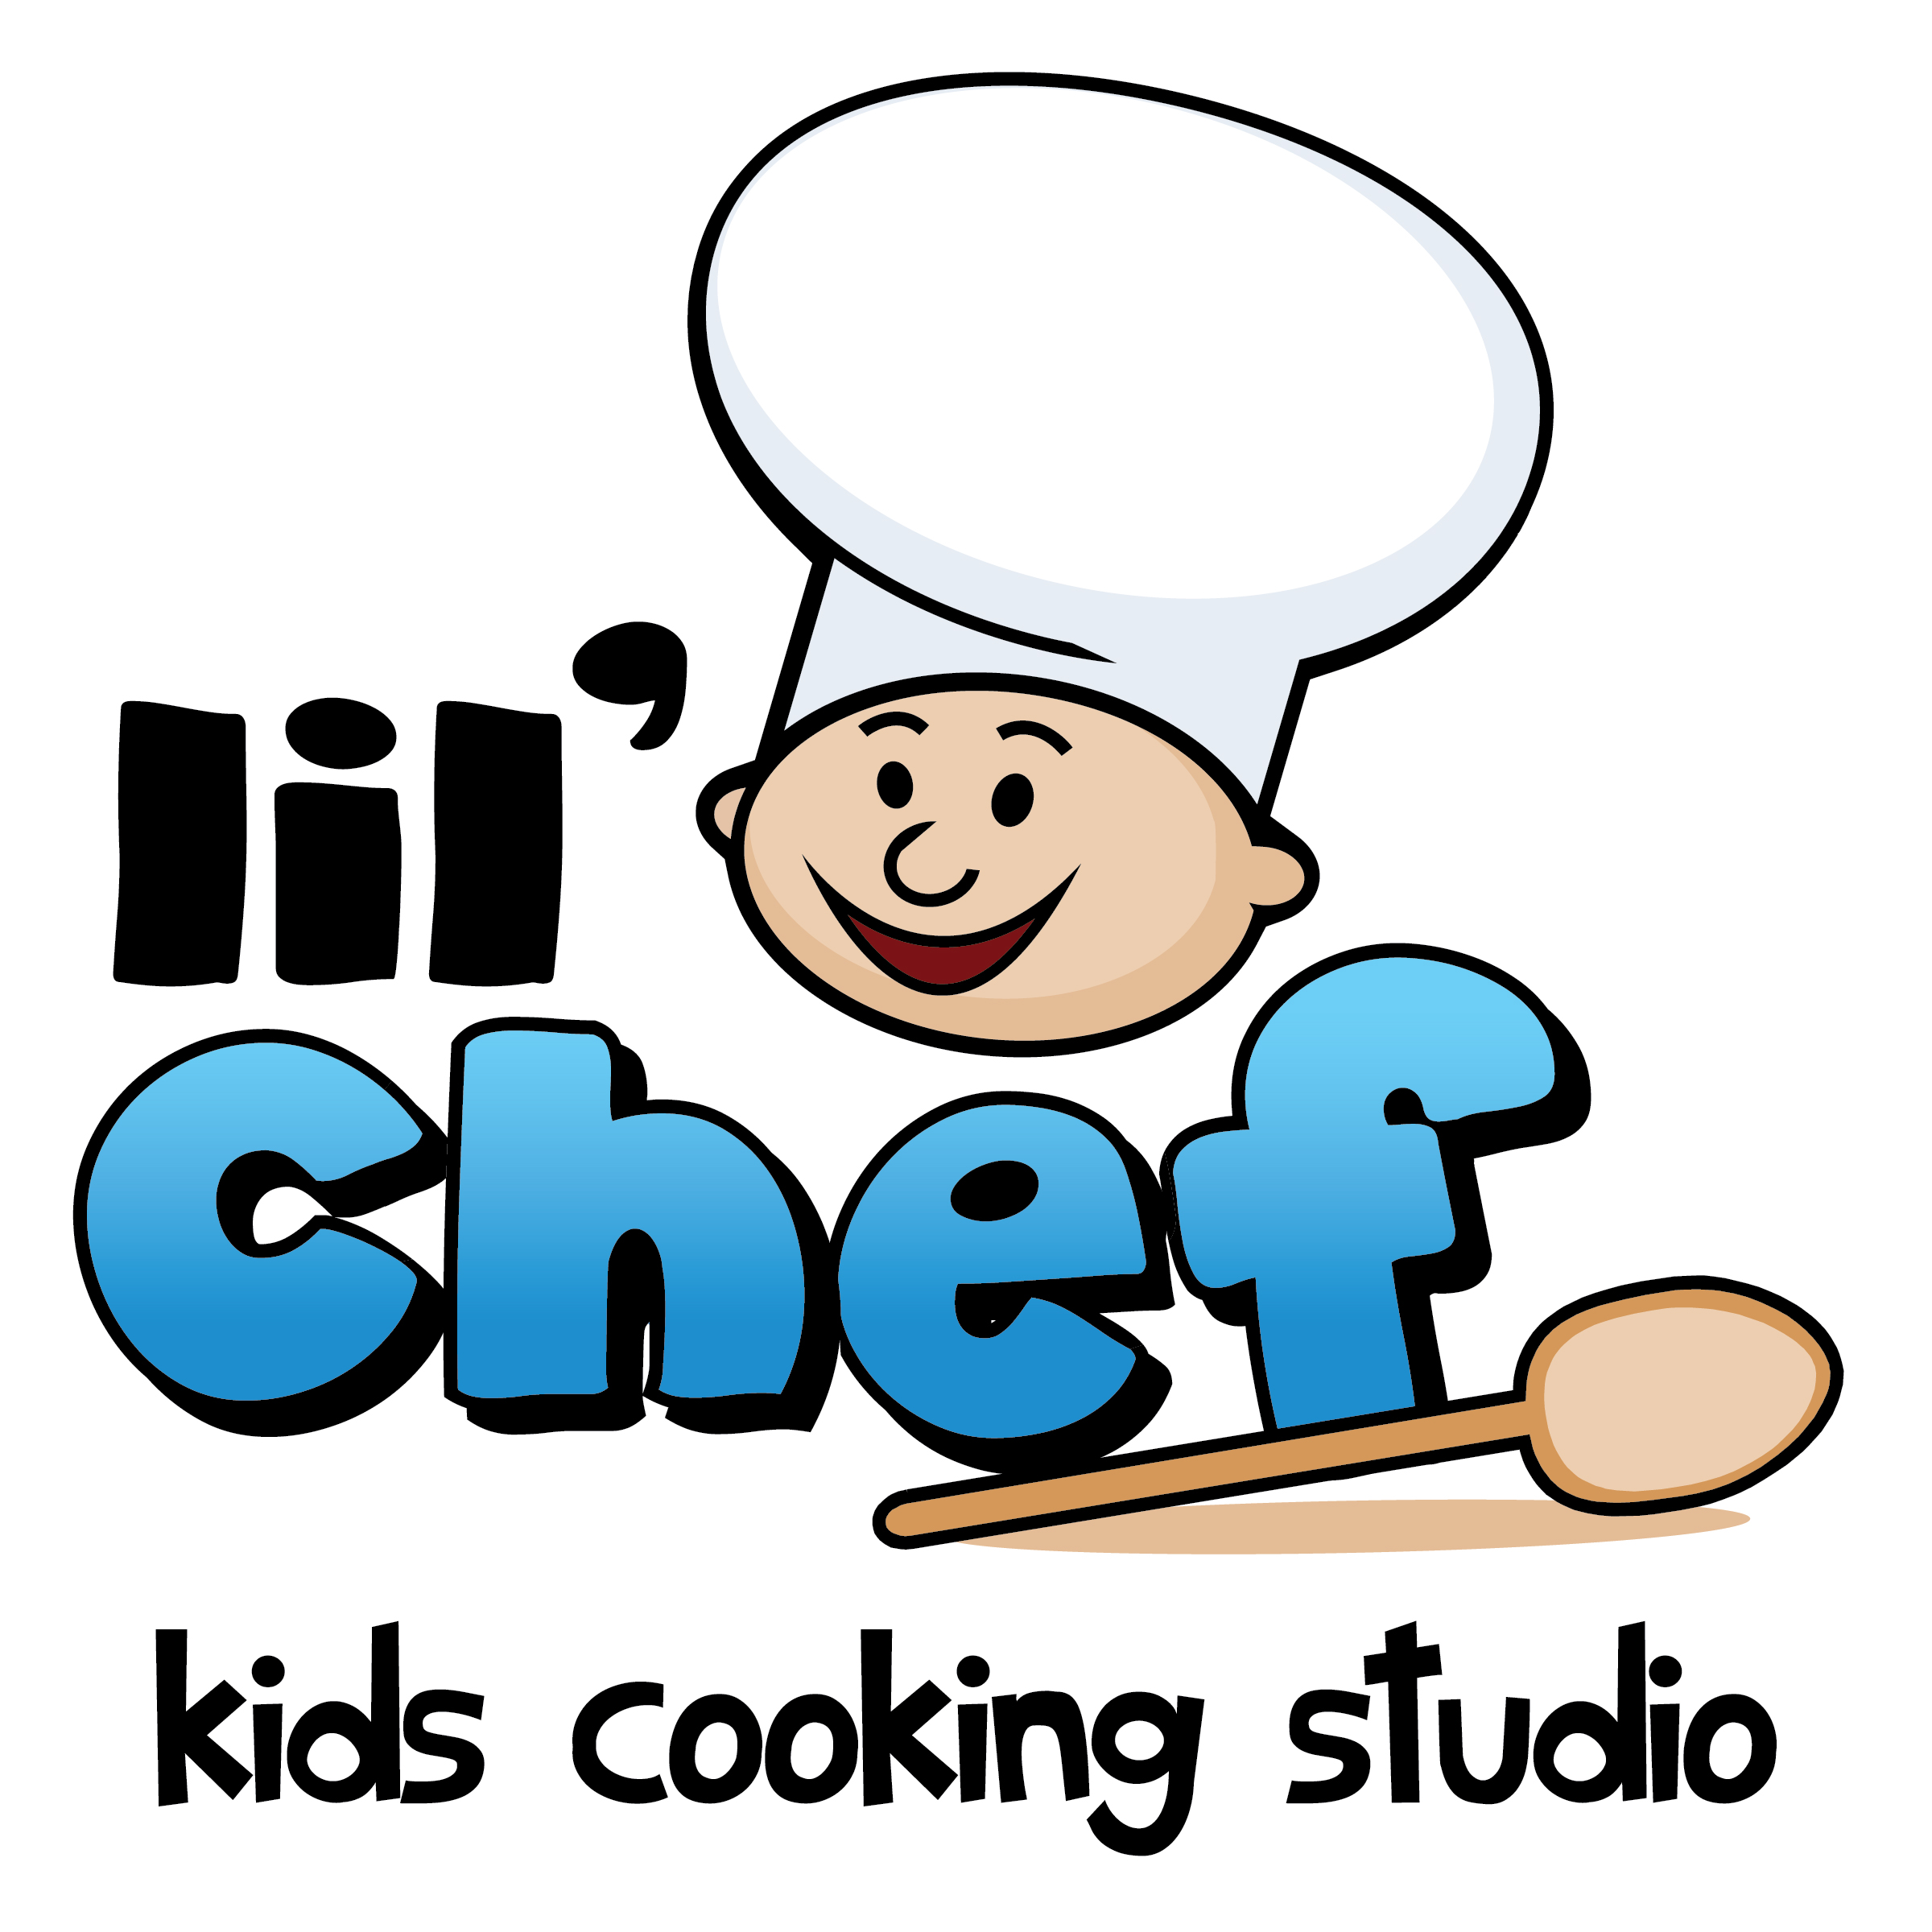 Lil' Chef Kids Cooking Studio – Cooking with your Lil' Chef